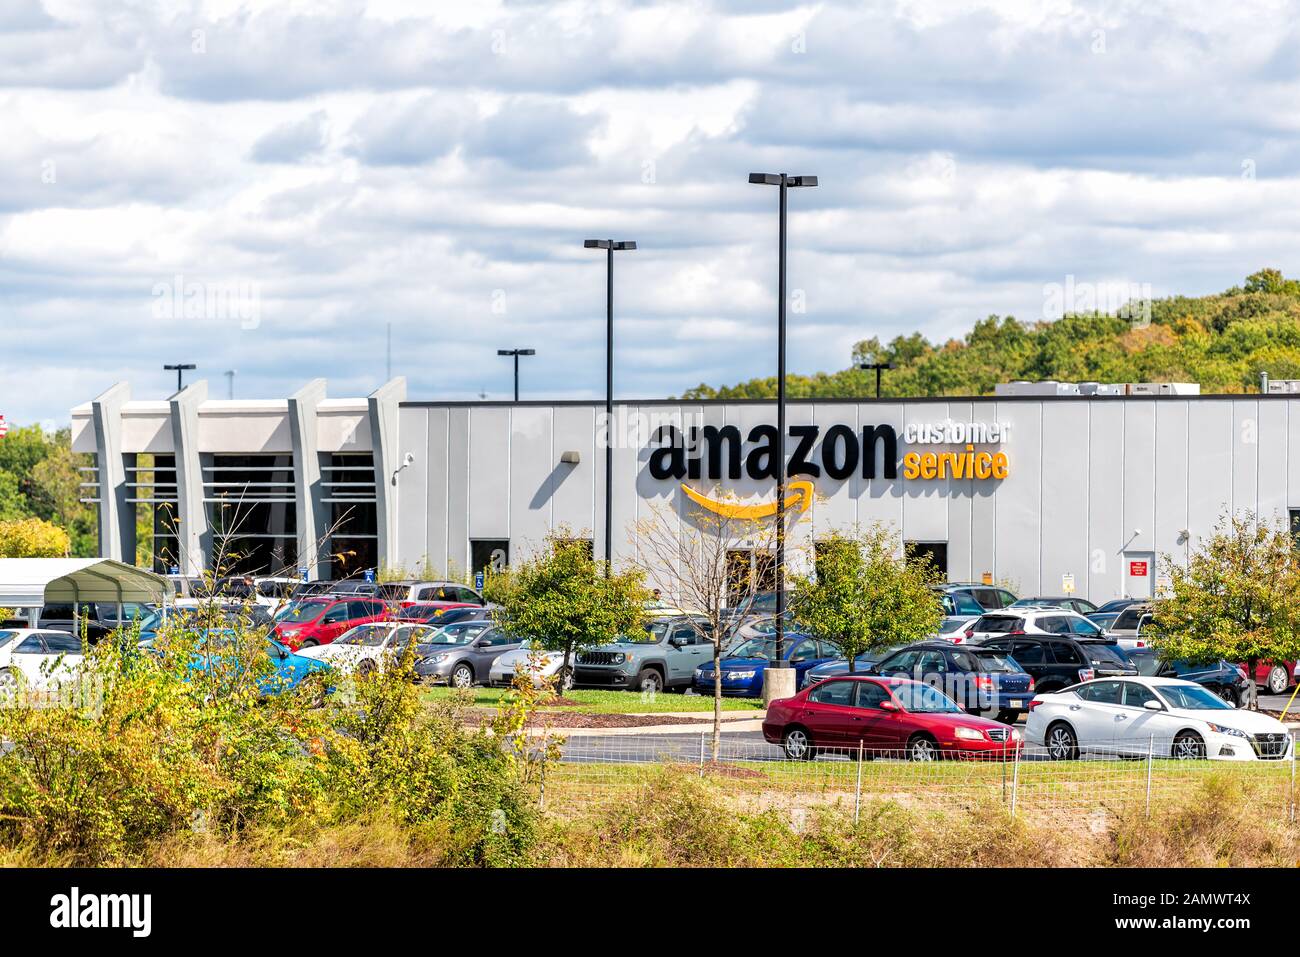 Huntington, USA - October 17, 2019: Amazon Customer Service center sign on exterior building in city in West Virginia with parking lot cars Stock Photo